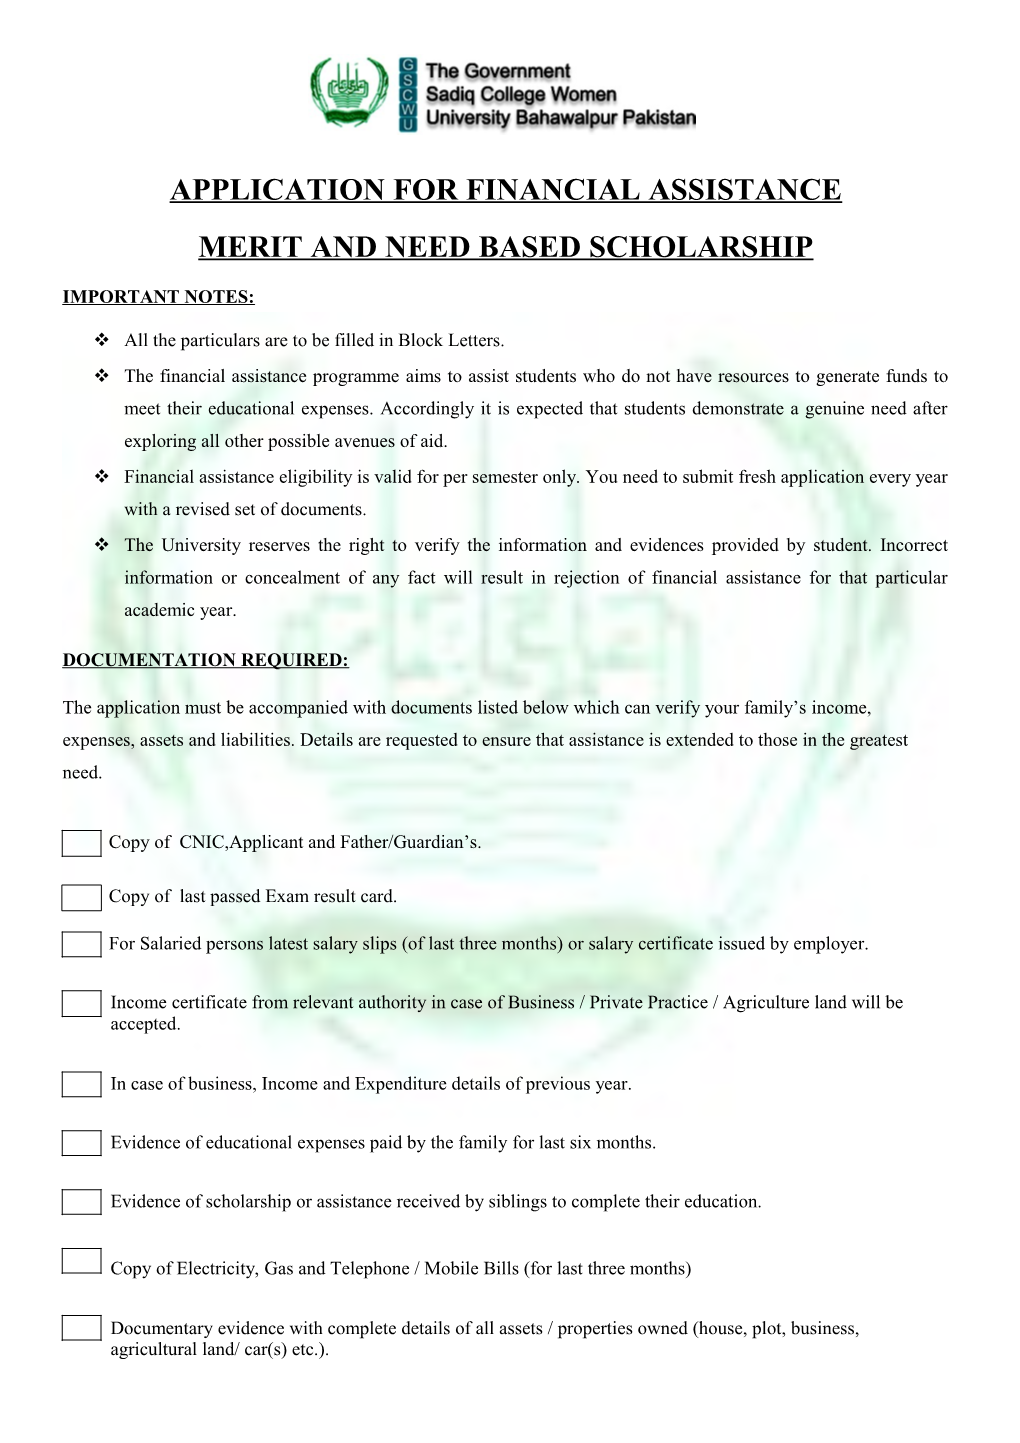 Application for Financial Assistance s5